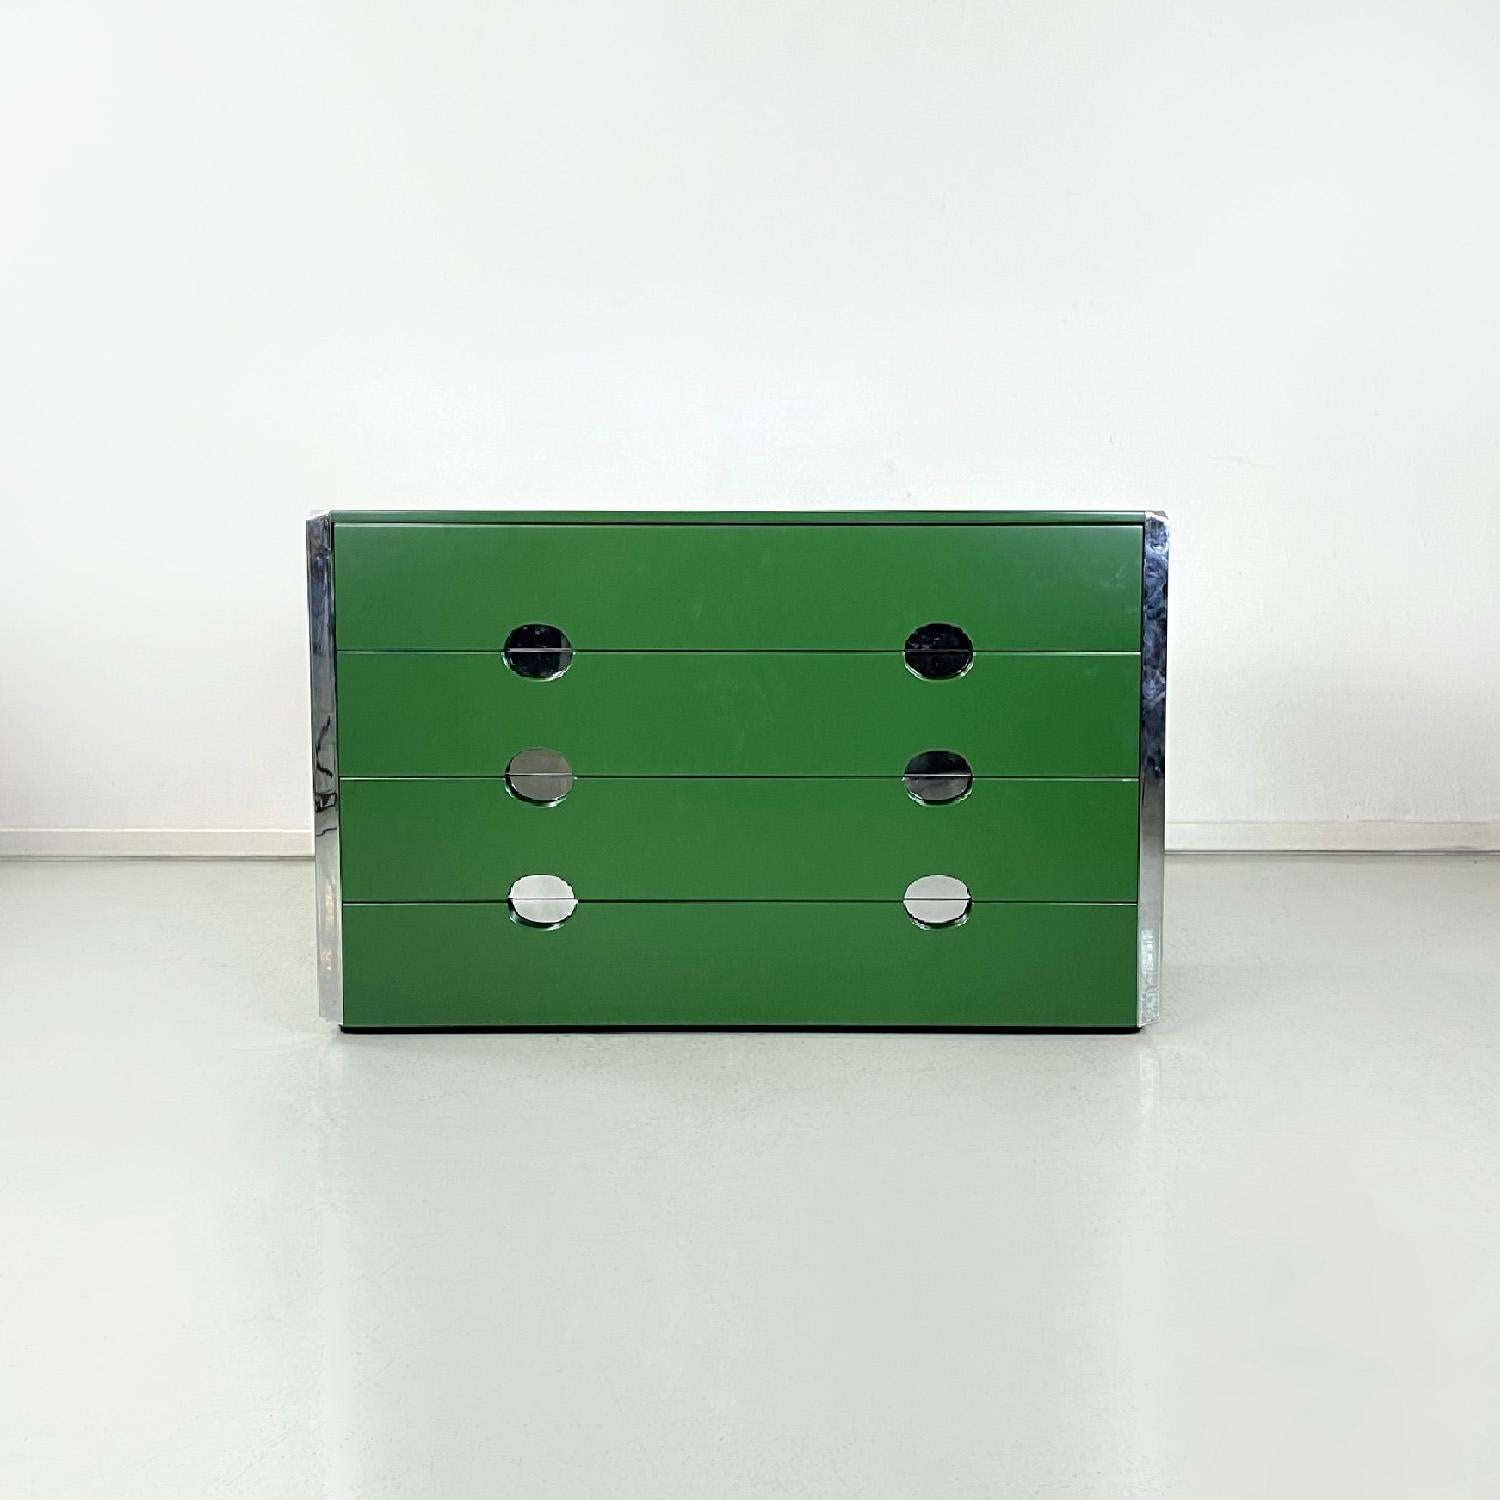 Italian modern MB3 chest of drawers by Luigi Caccia Dominioni for Azucena, 1970s
Rectangular chest of drawers mod. MB3. The structure is in green lacquered wood with a matte finish, on the sides there is a chromed metal bar of the same height as the